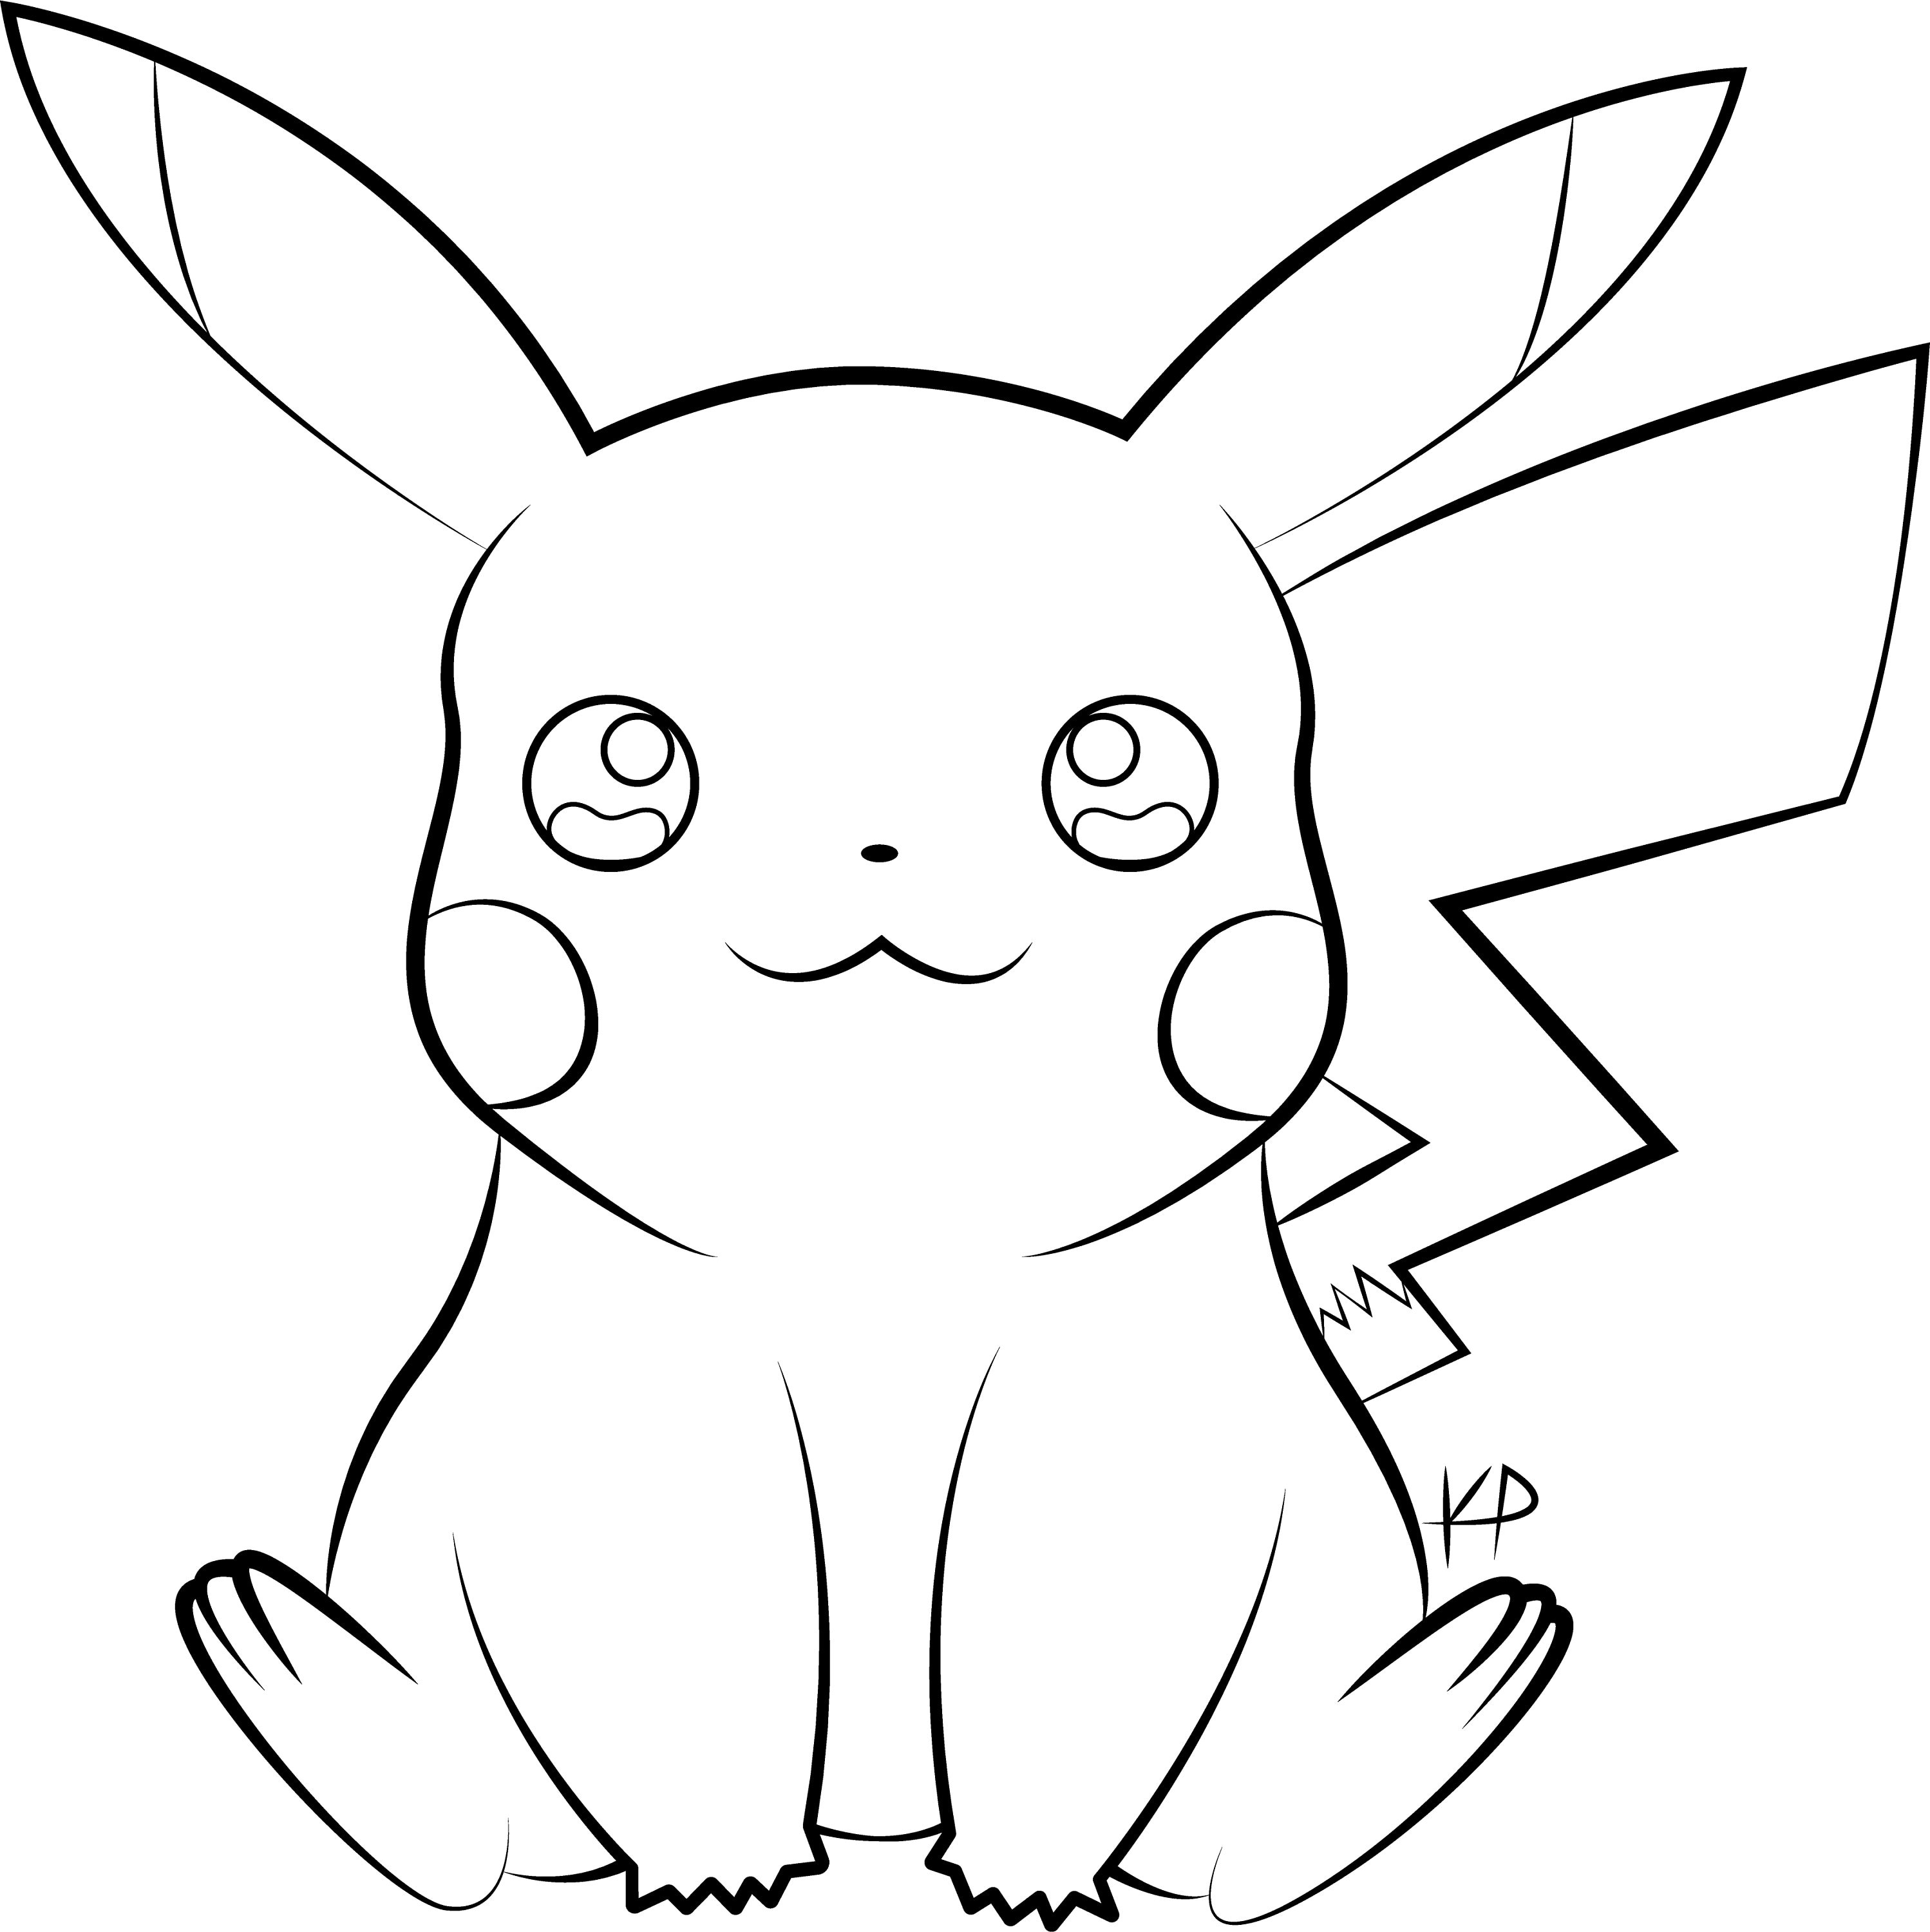 Pikachu Coloring Pages Adult Coloring Pages